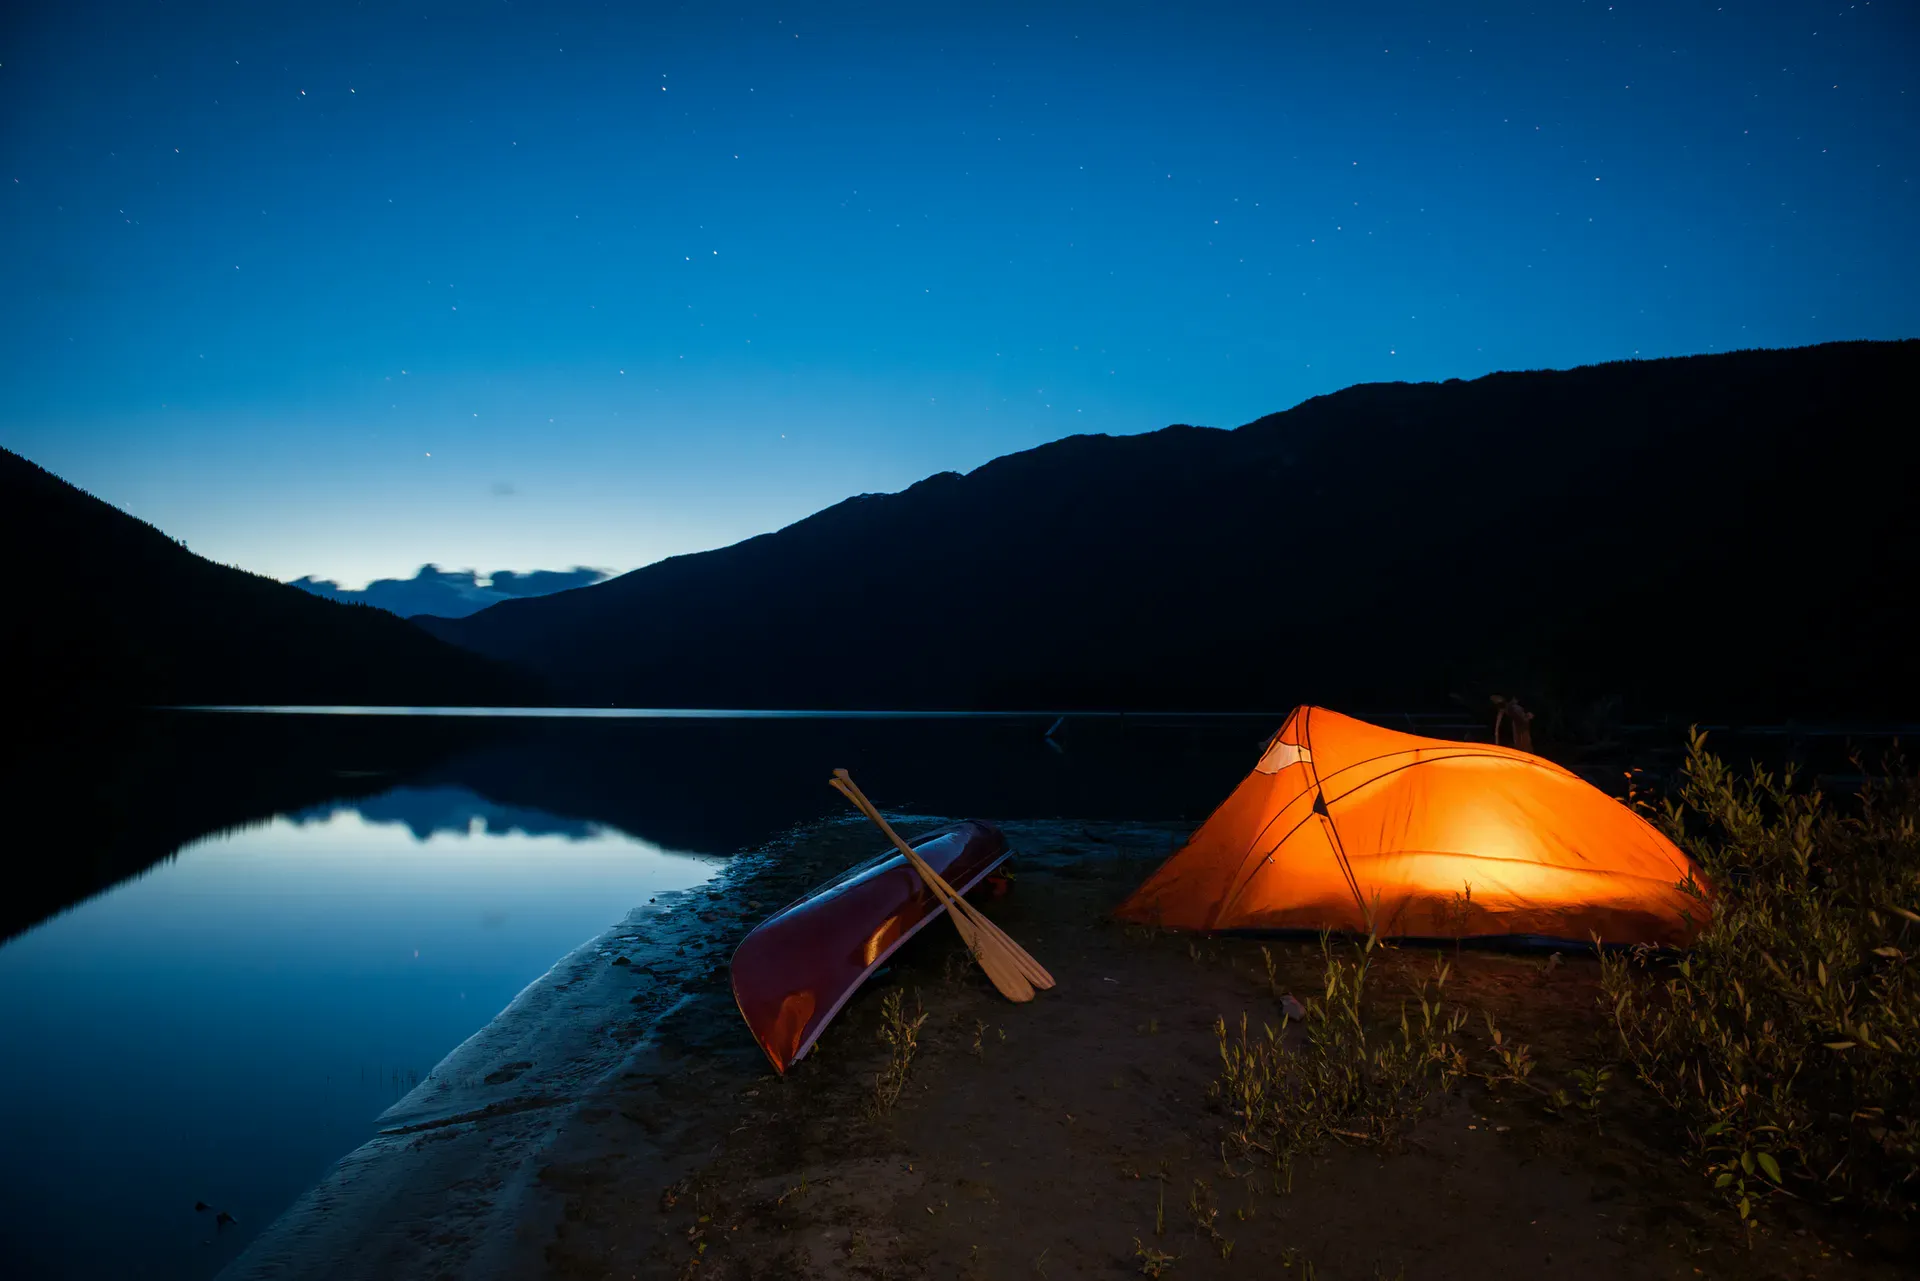 Canoe and tent by a lake at dusk